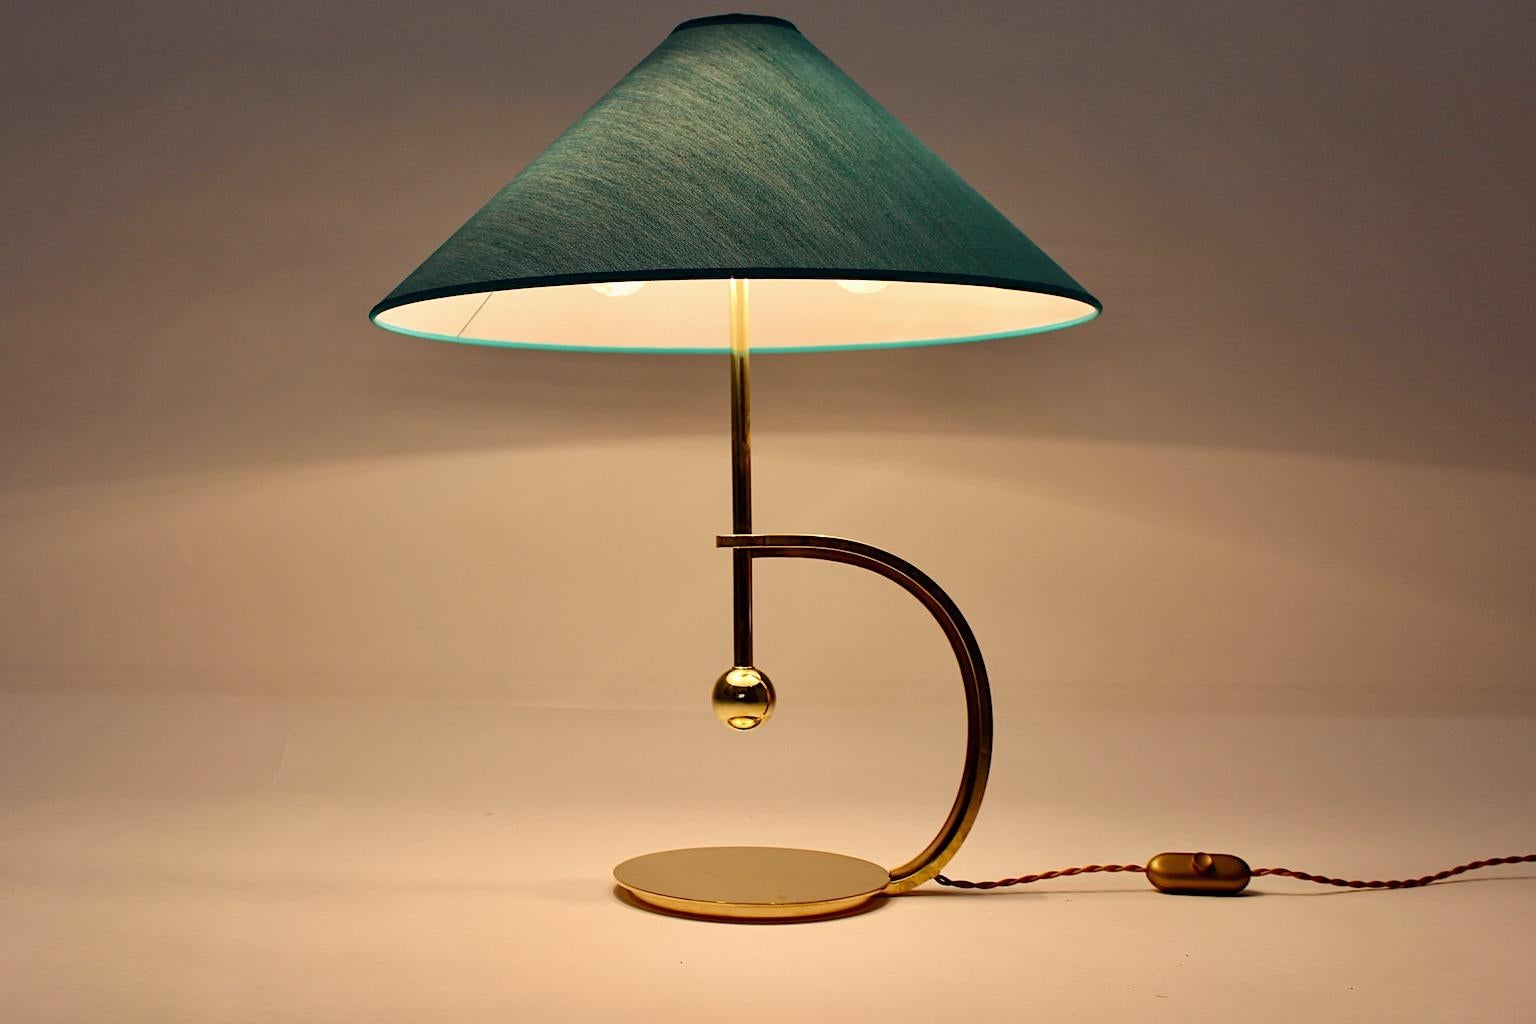 Art Deco vintage table lamp or desk lamp from solid brass circa 1925 Vienna.
While the brass is in wonderful condition, polished some times ago, the new handmade lamp shade in original shape shows a turquoise teal light blue color tone. 
Two E 27